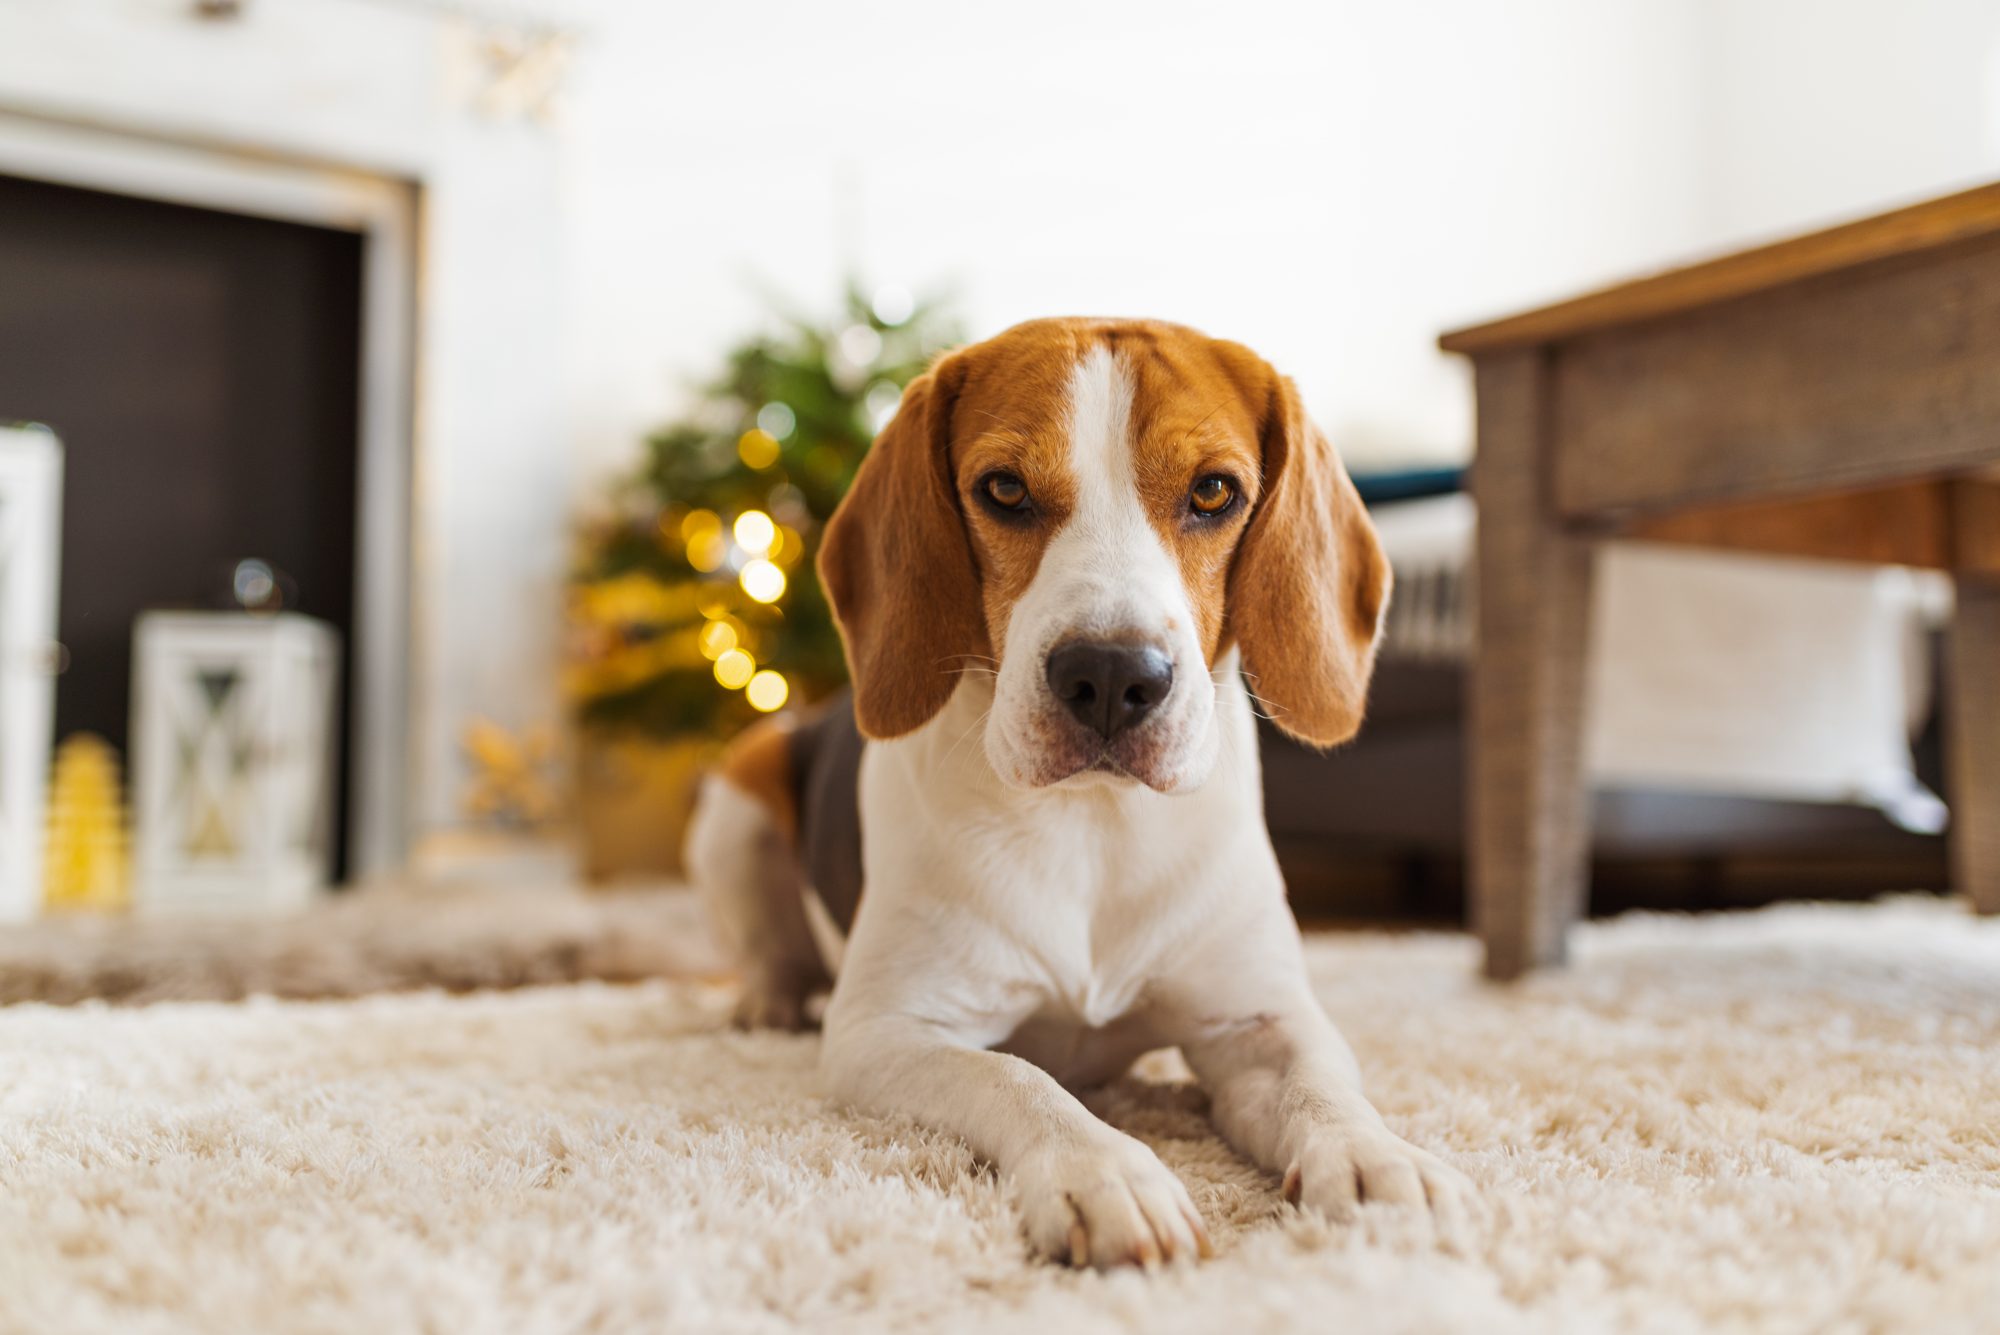 How can I stop my dog from scratching the carpet at night?